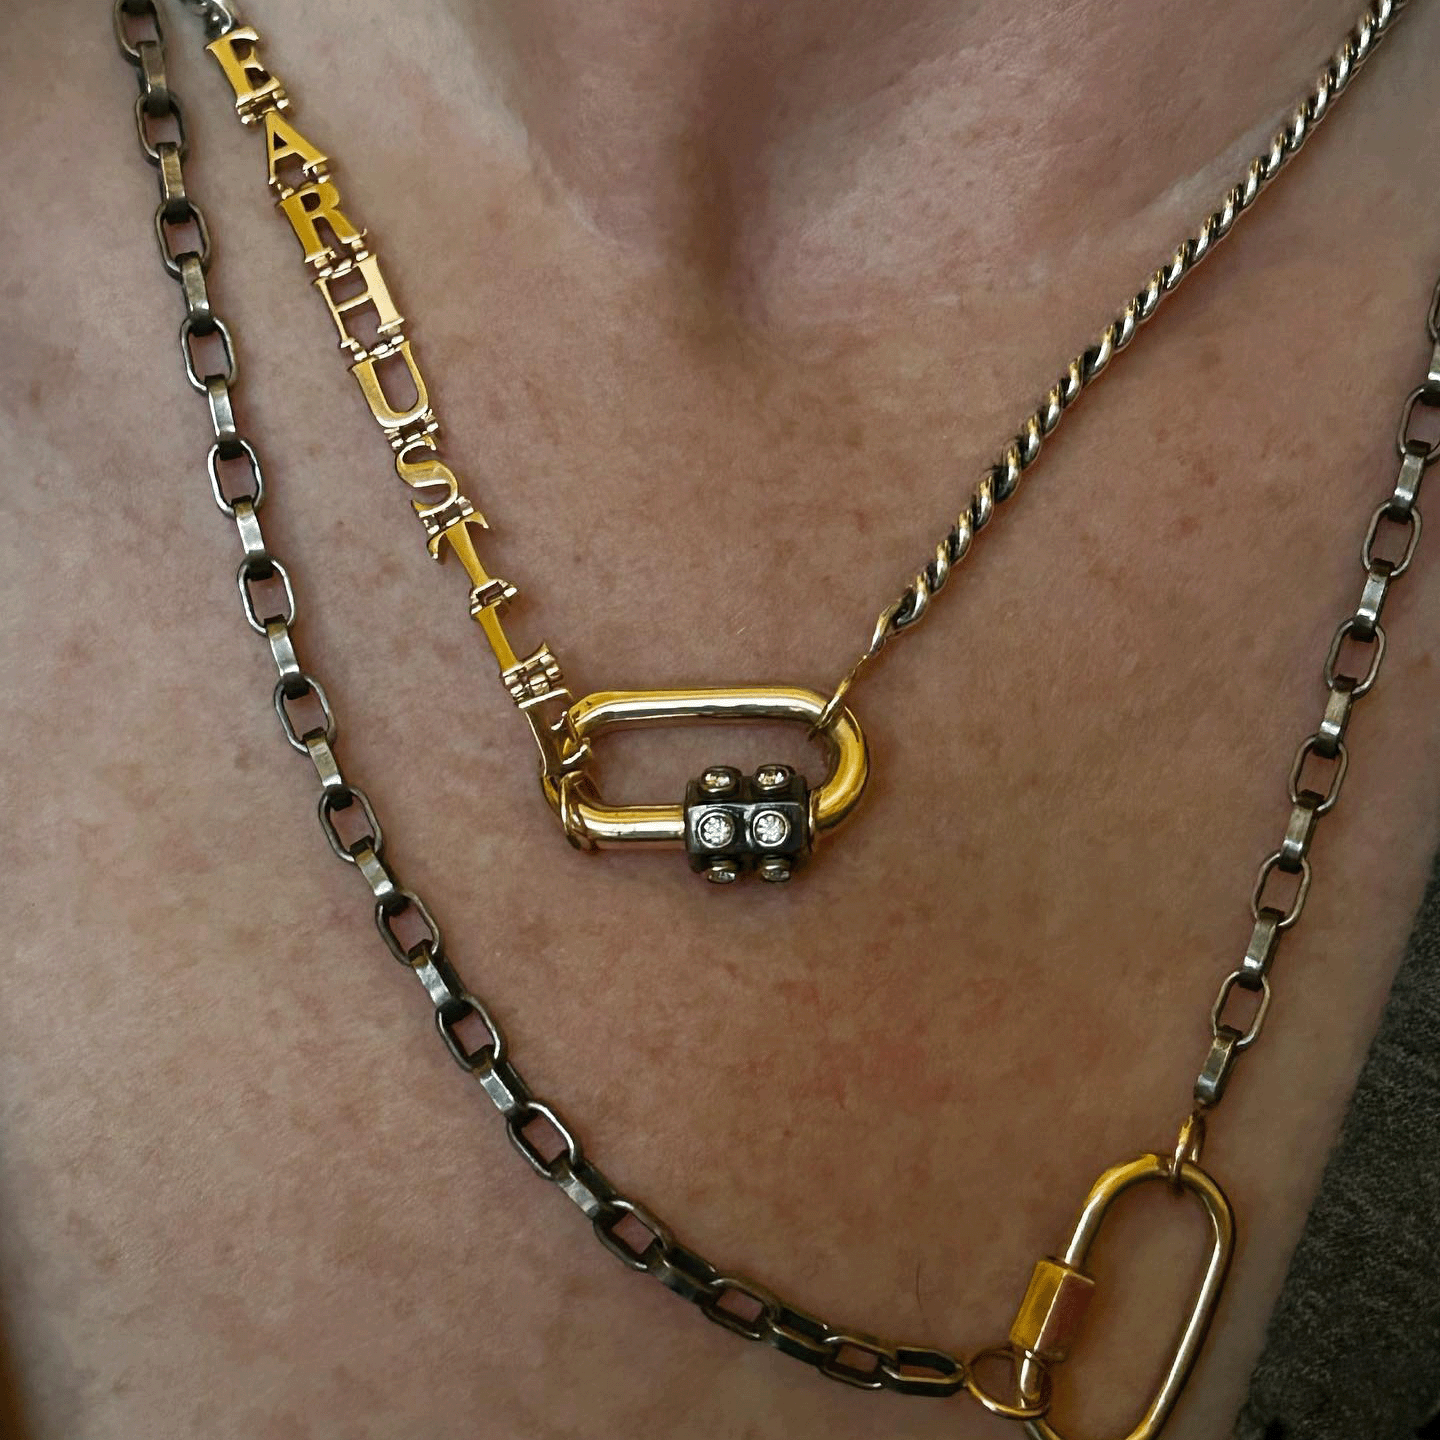 Close up of neck wearing blackened silver chain necklace